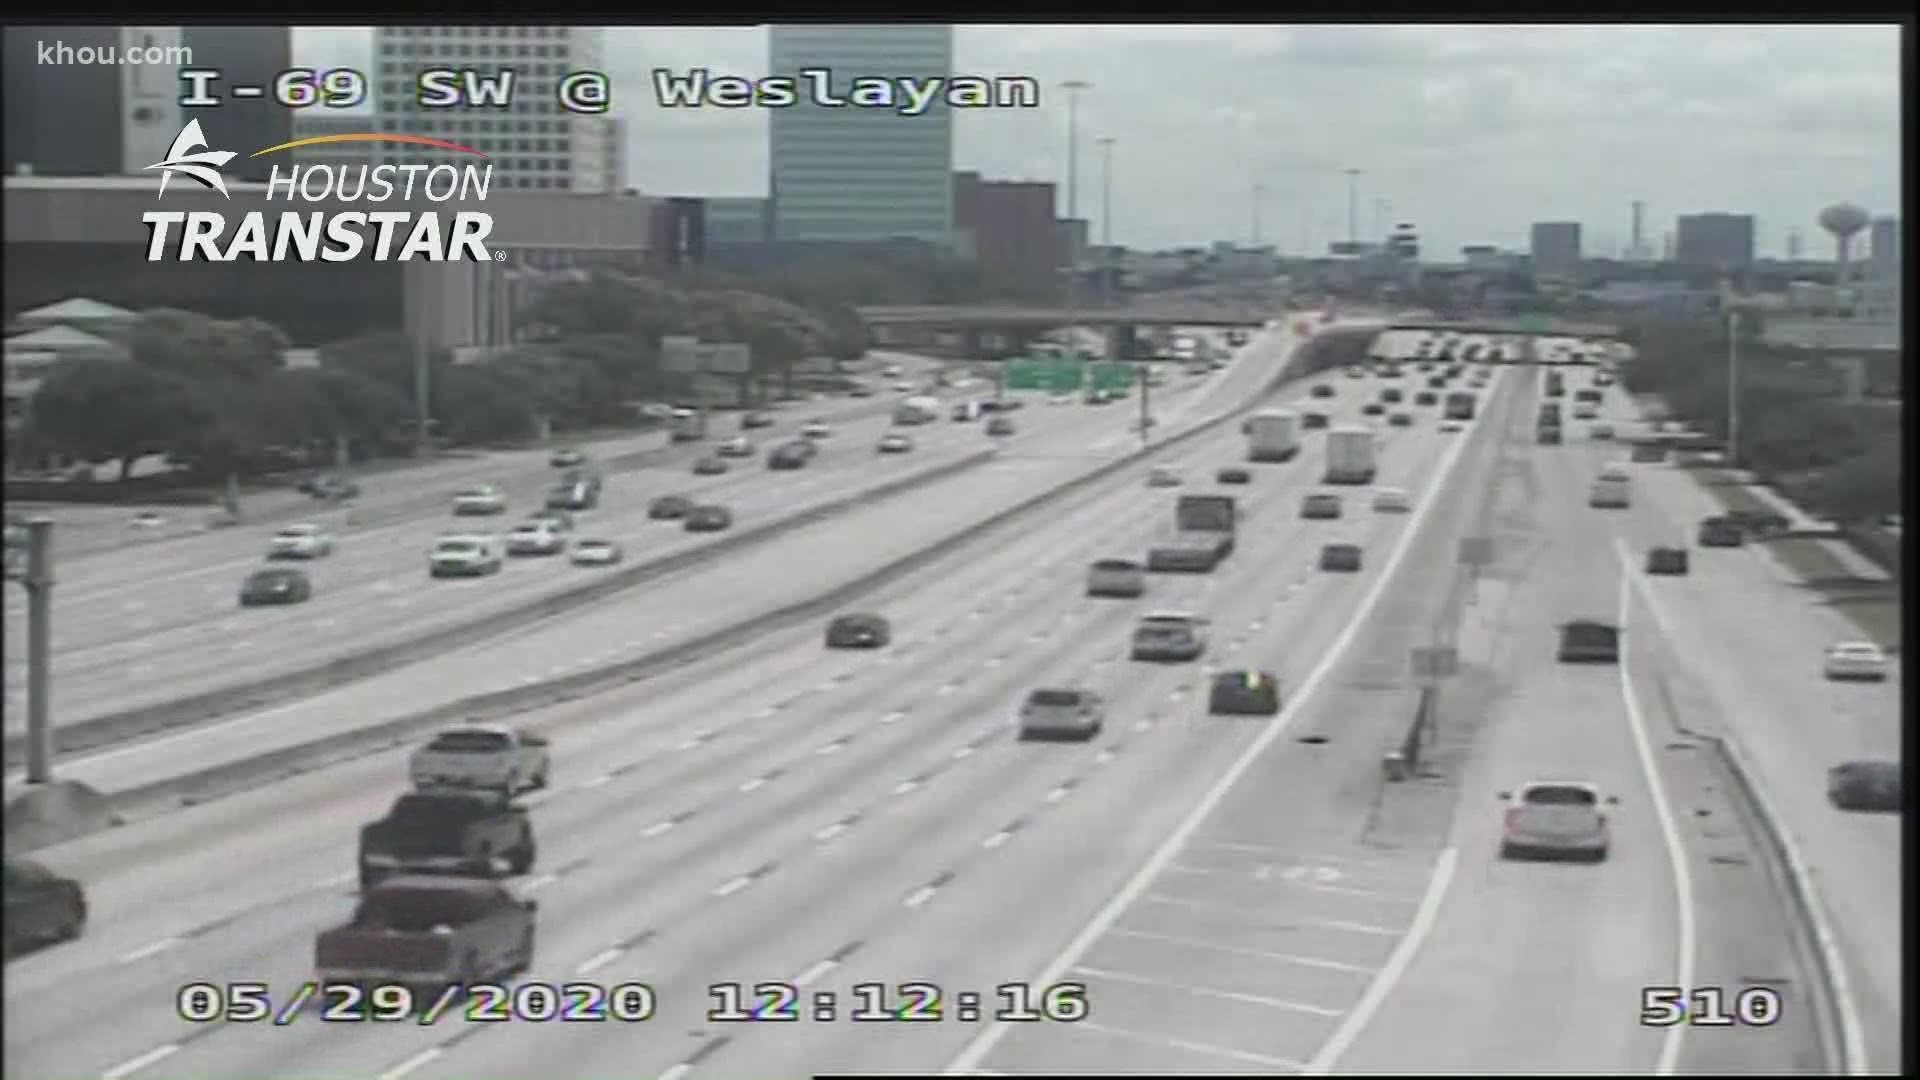 The Southwest Freeway closed both ways between West Loop, Wesleyan this weekend for major construction project that will begin 9 p.m. Friday.